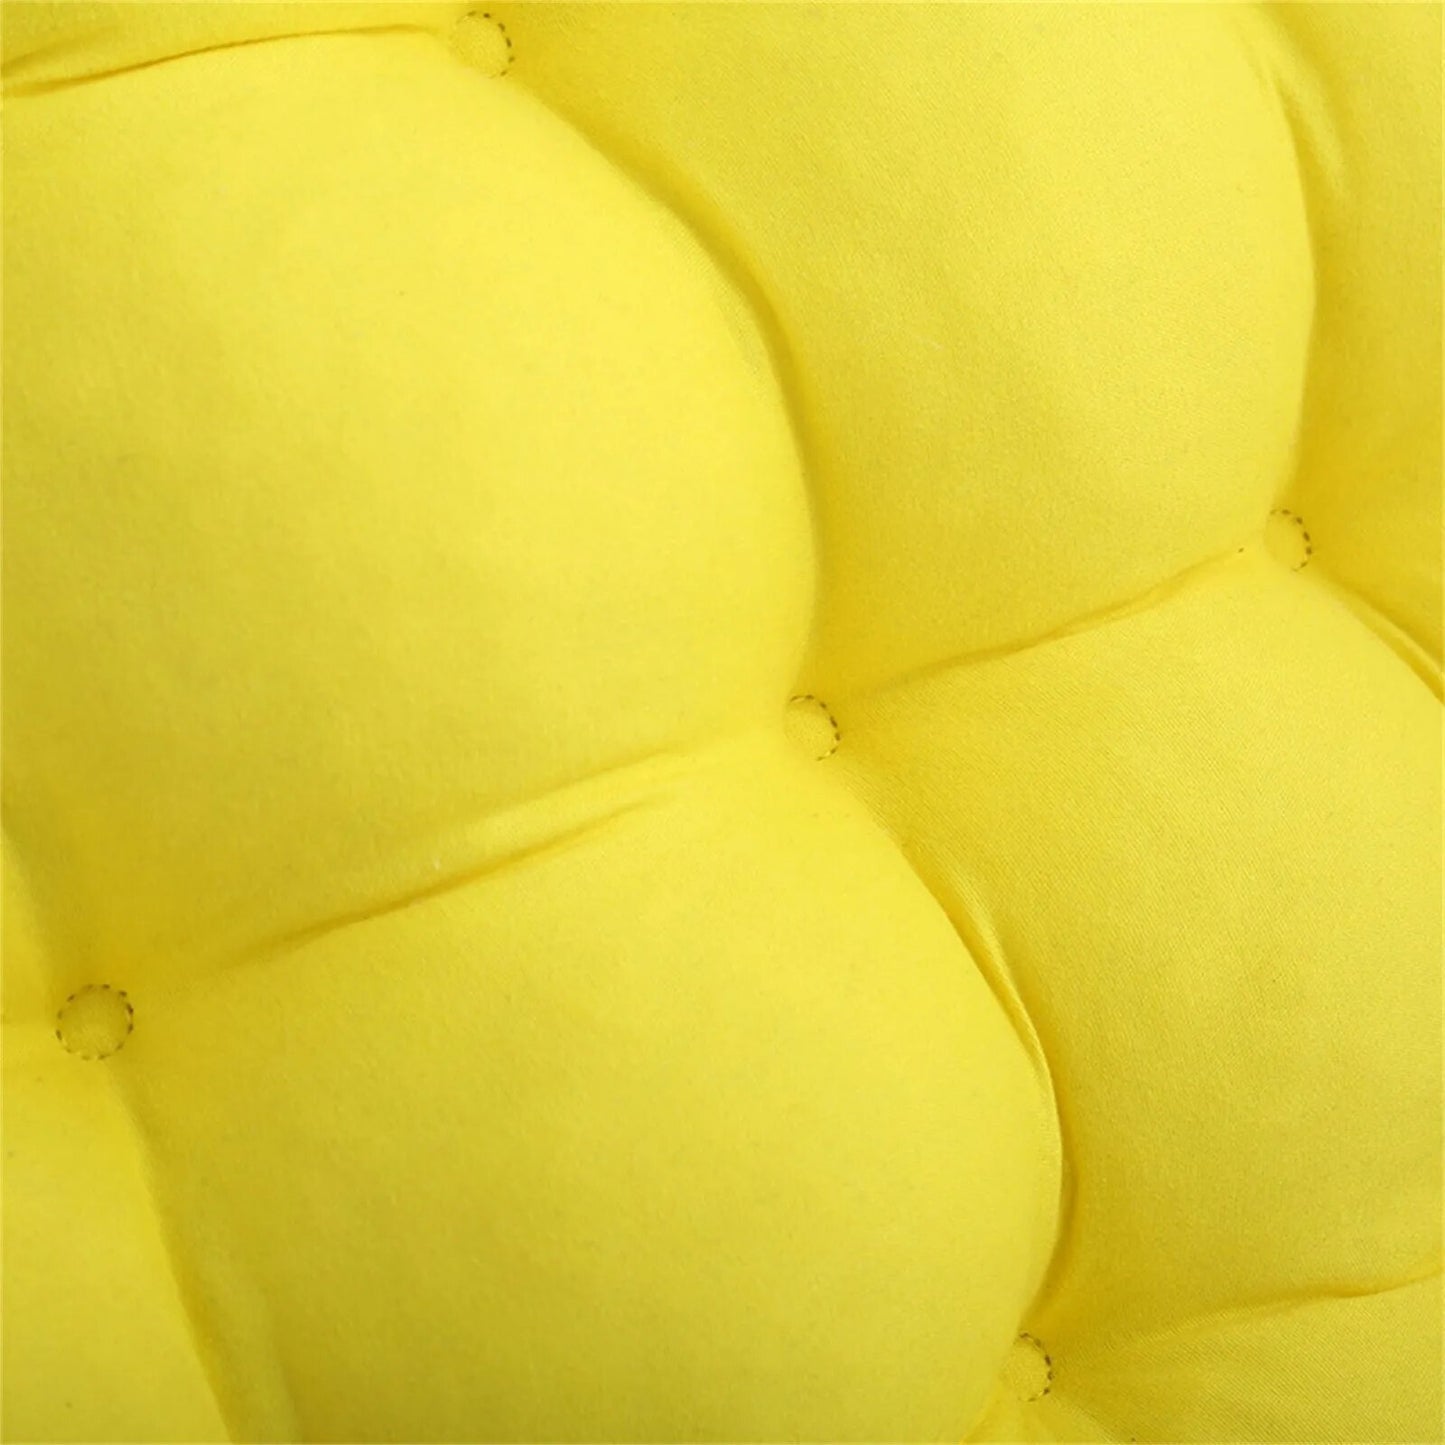 Soft Thicken Pad Chair Cushion Tie on Seat Cushion Dining Patio Room Kitchen Office Decor Indoor Outdoor Garden Buttocks Pad